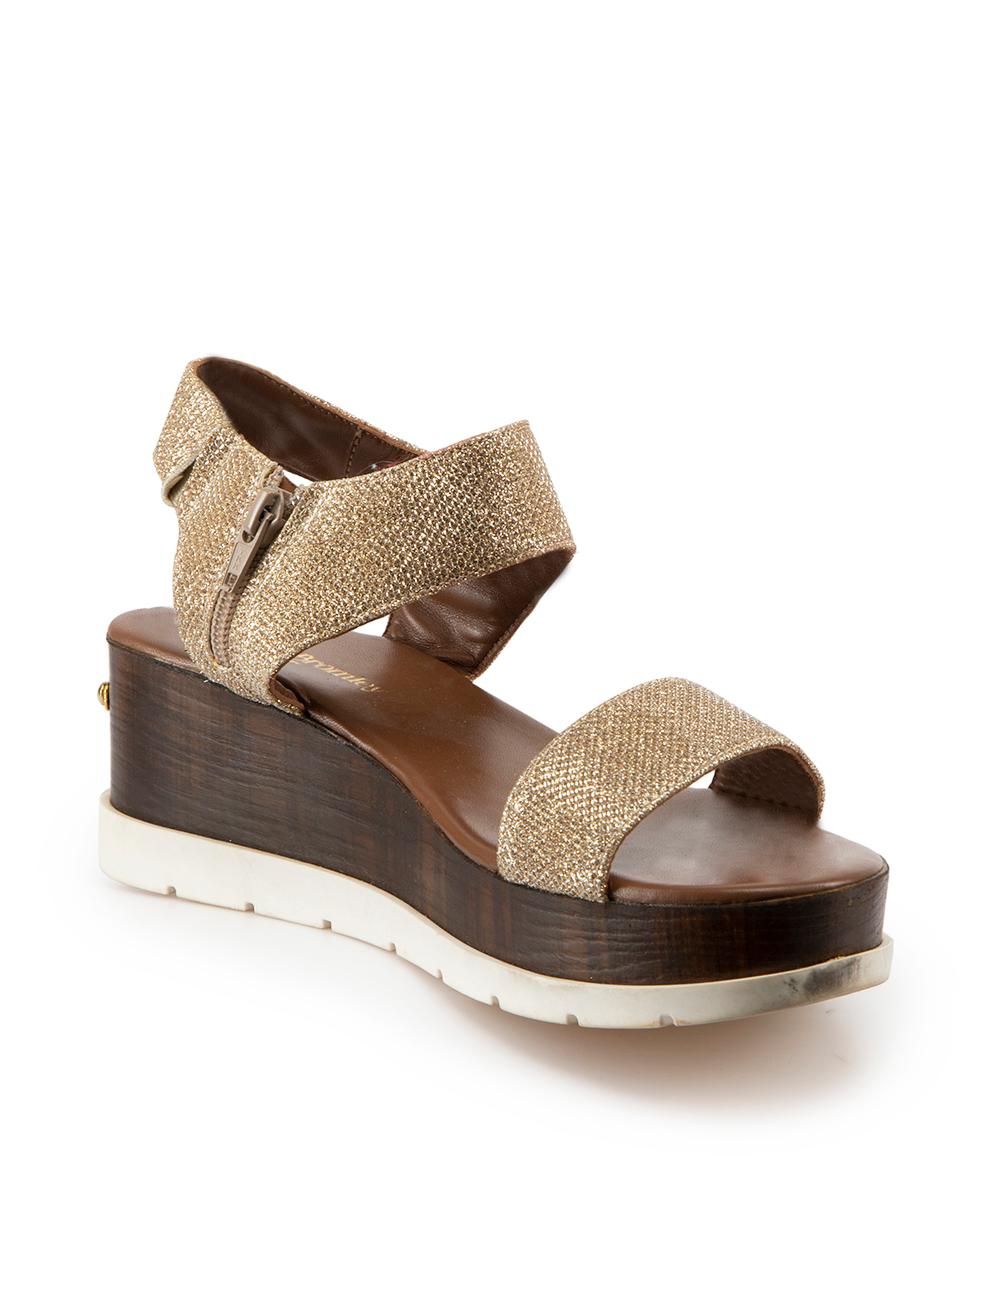 CONDITION is Very good. Minimal wear to sandals is evident. Minimal wear to the rubber soles of both shoes with discoloured marks on this used Russell & Bromley designer resale item. 
 
Details
Gold
Glitter
Slide sandals
Open toe
Platform wooden